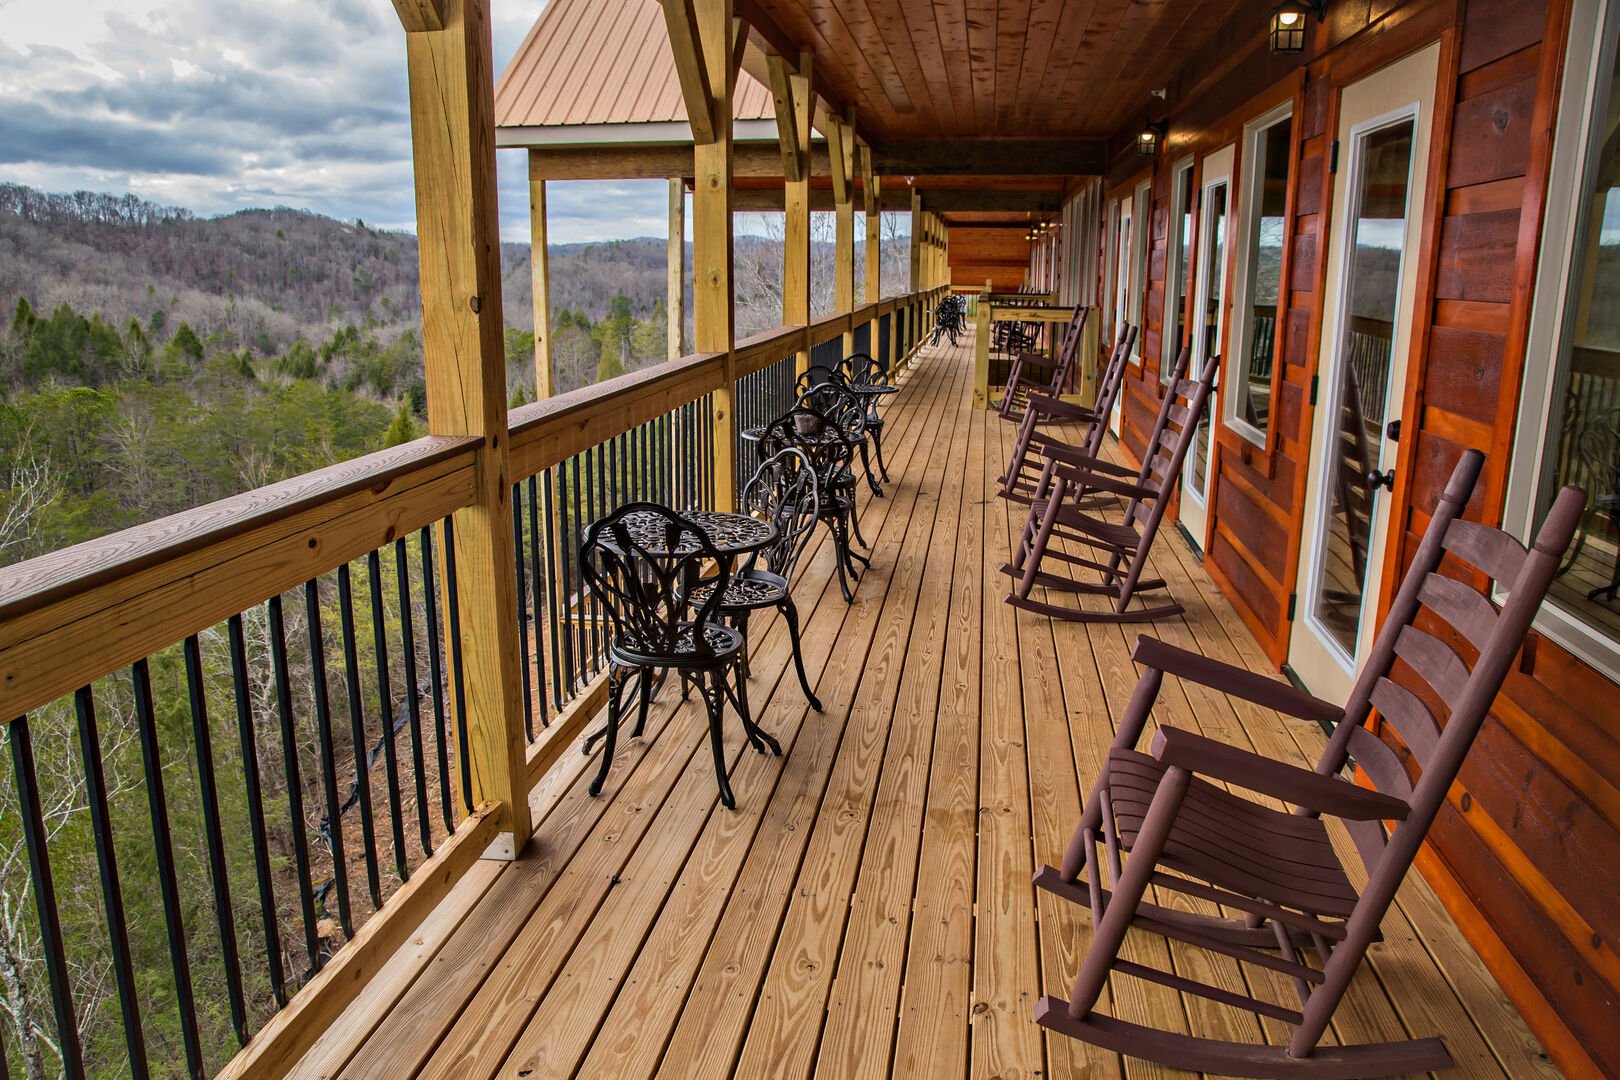 Large Deck with Many Outdoor Tables, Chairs, and Rocking Chairs.